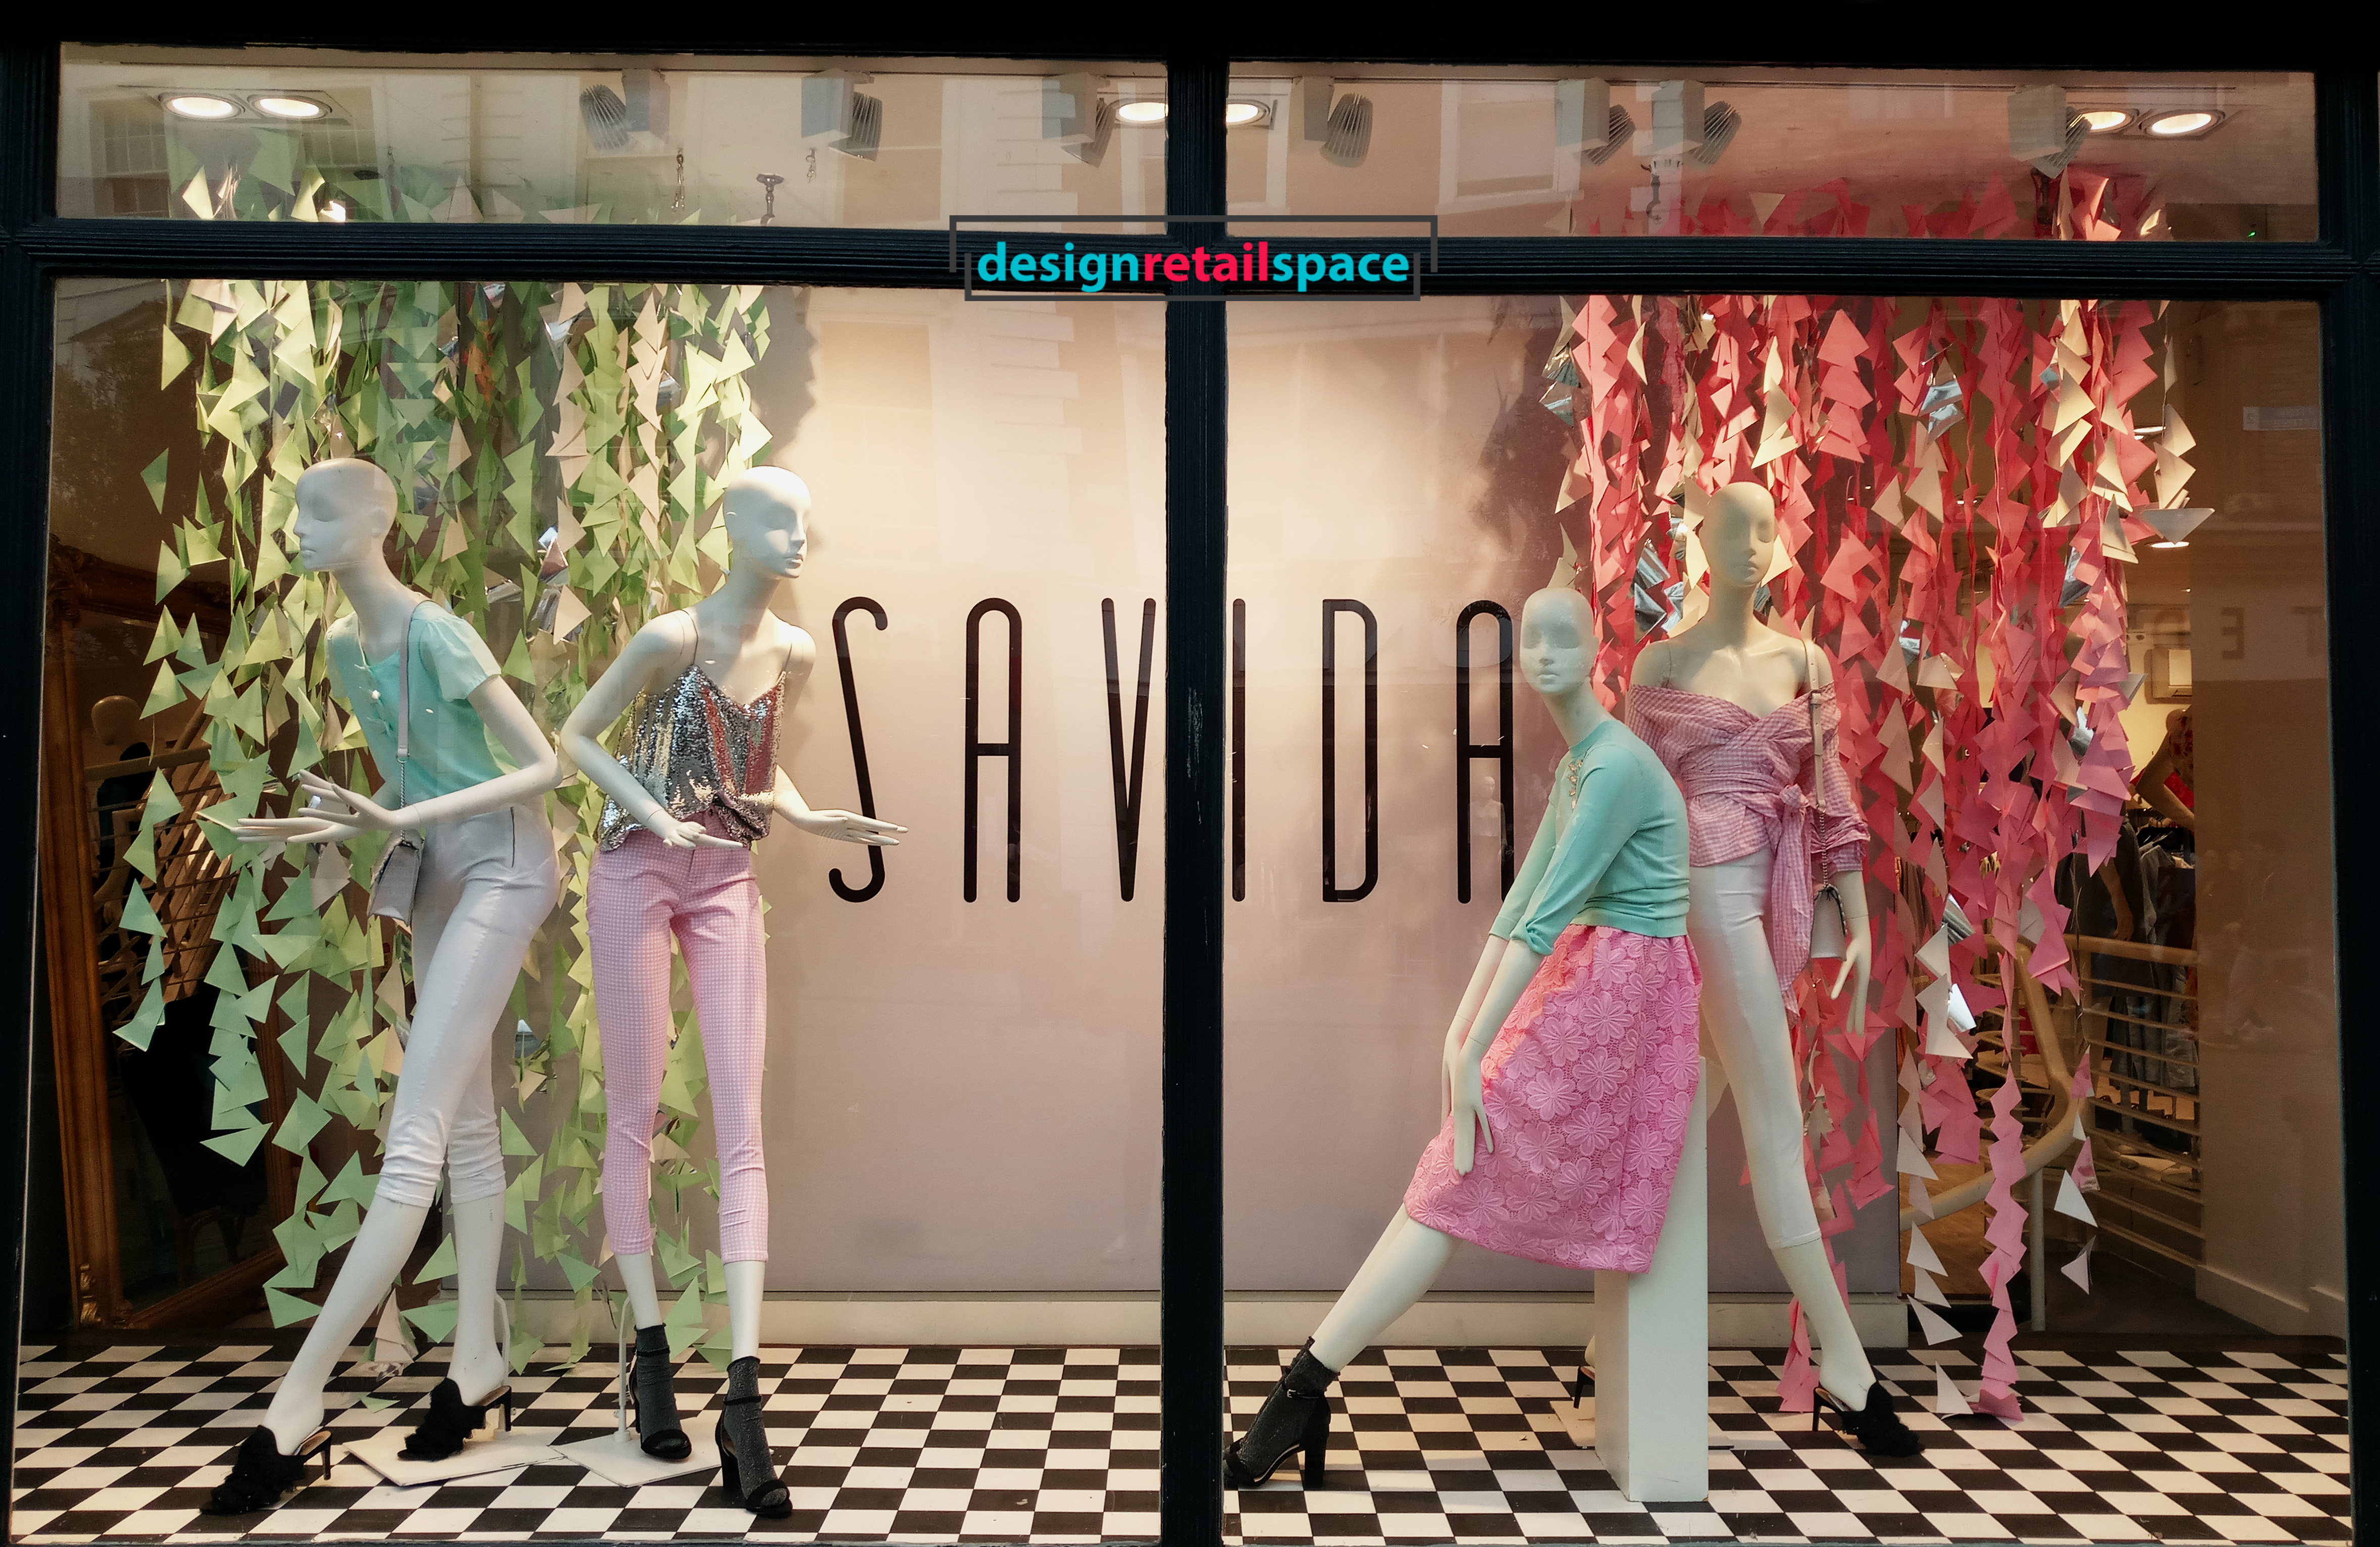 Dunnes Stores window display showing garland of flowers in pastel mint and pink colours representing colour trends 2018